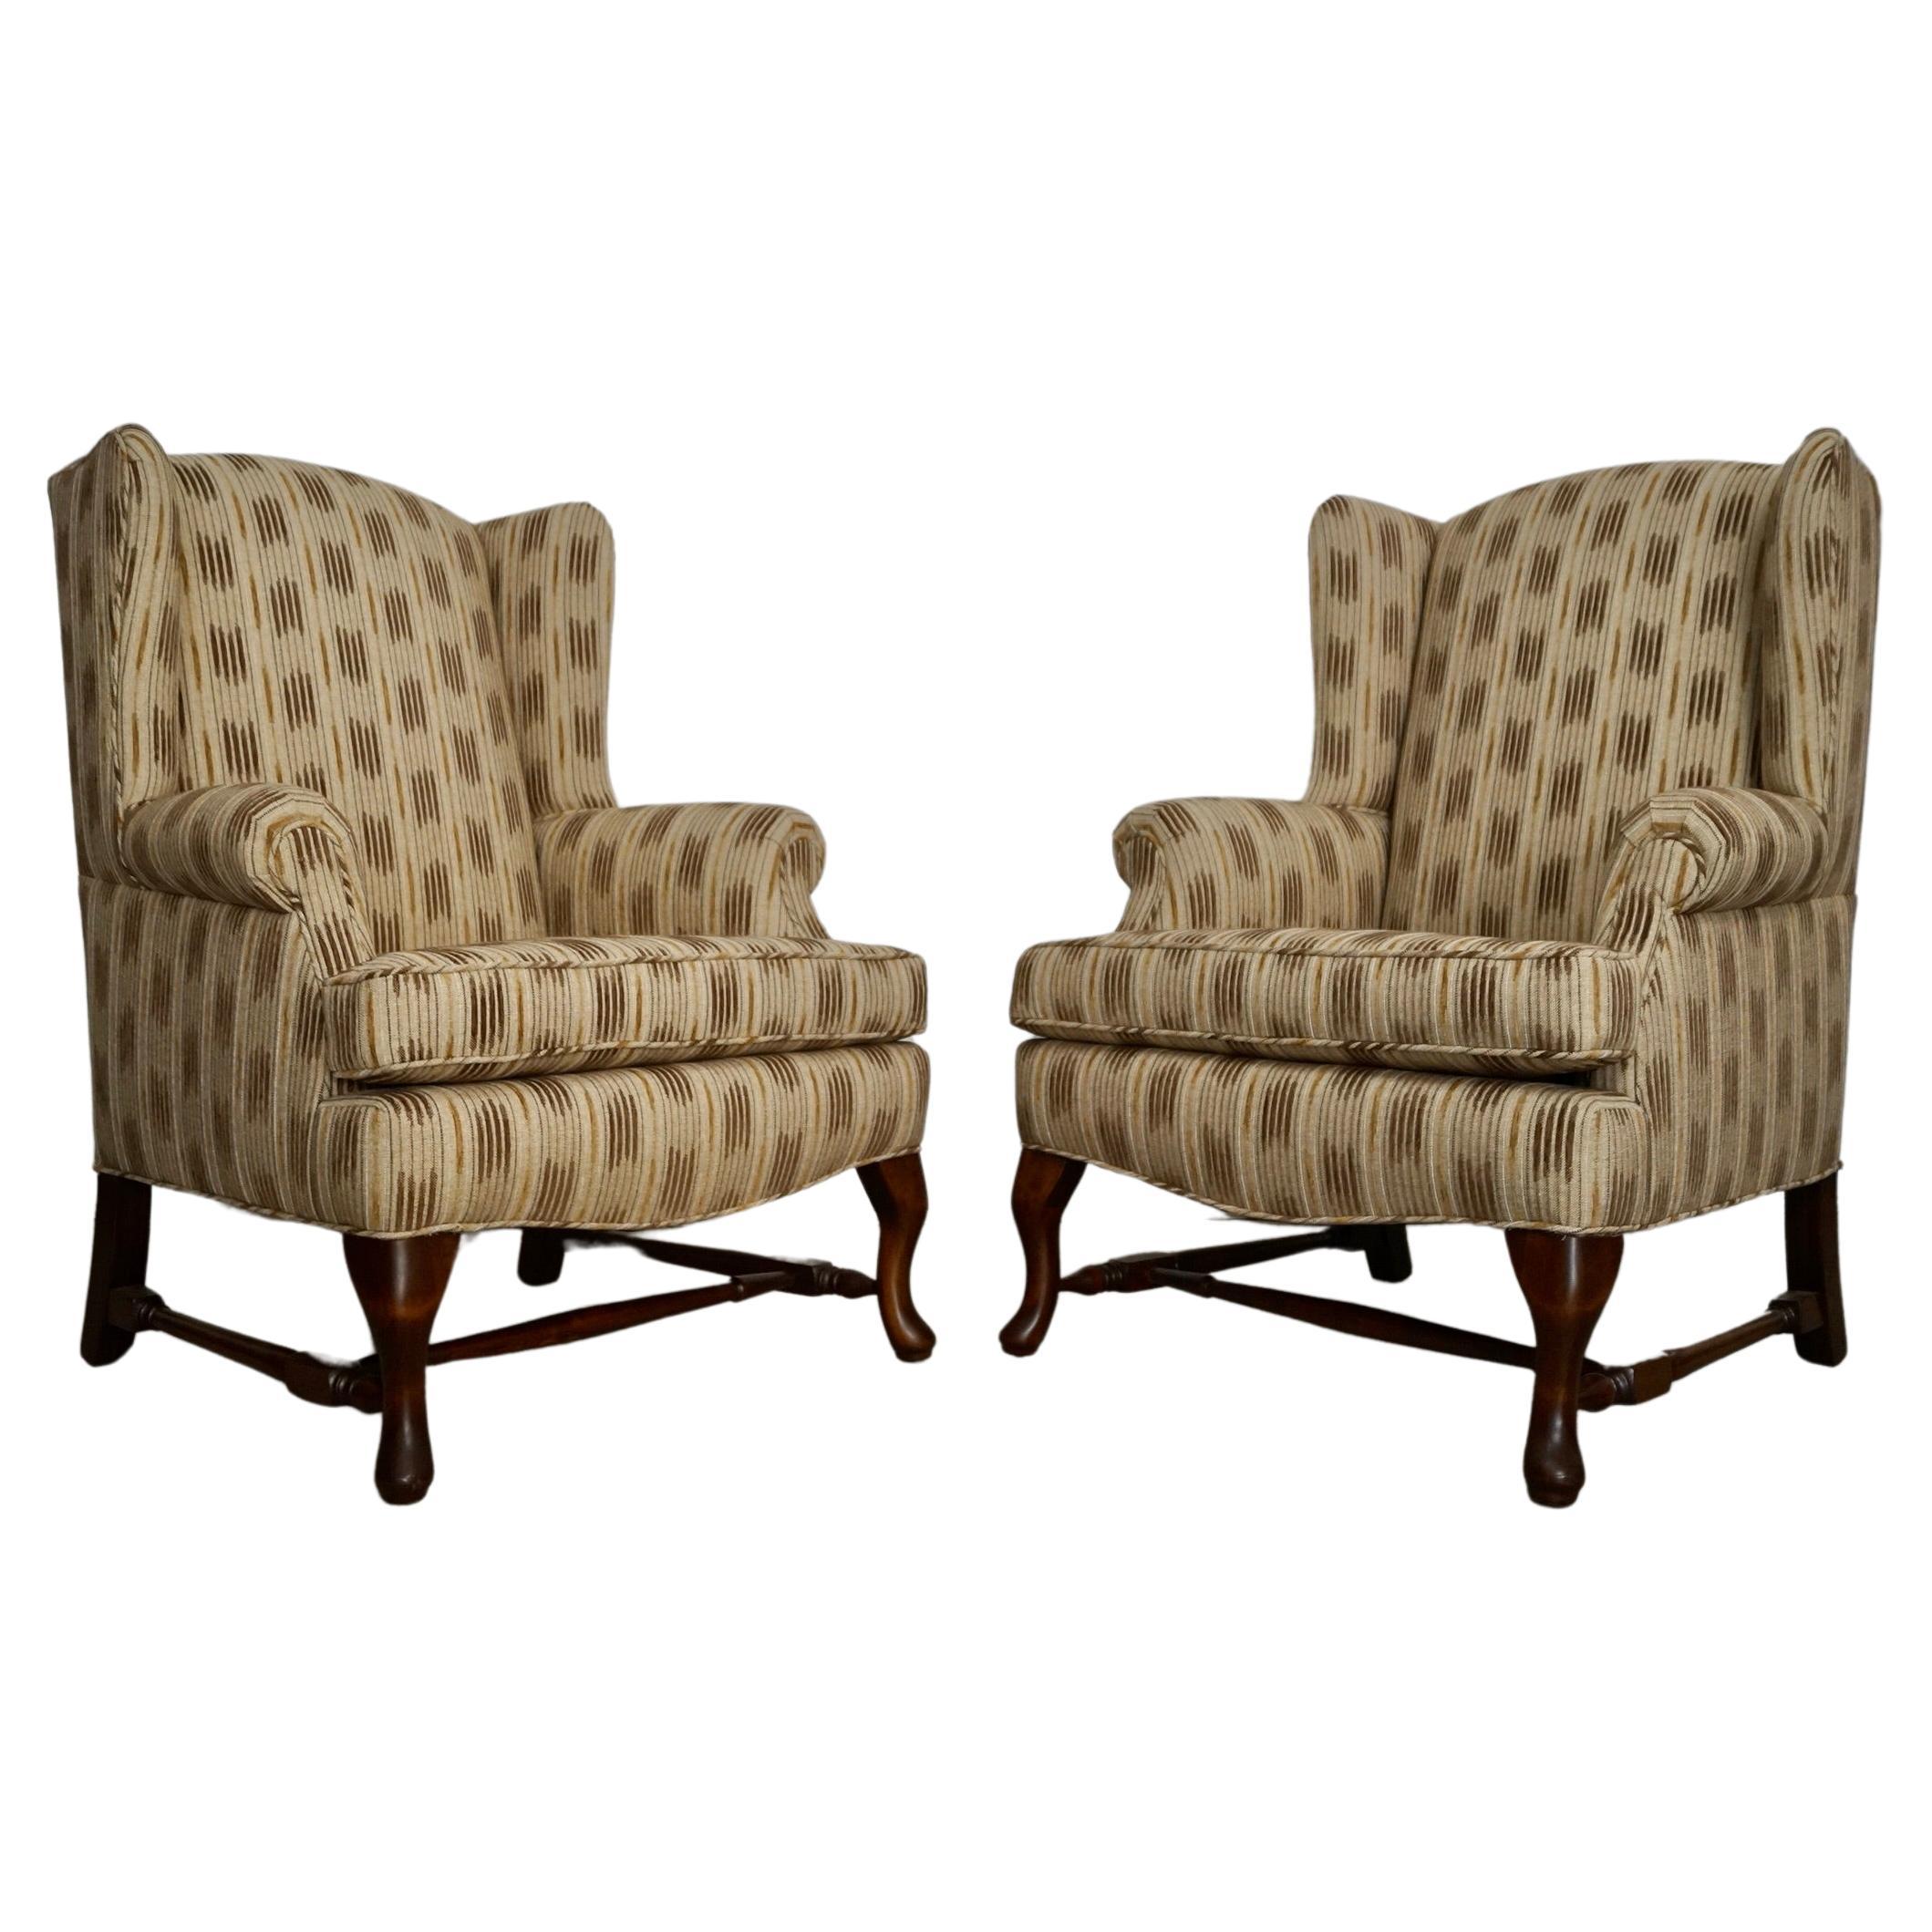 1970's Wingback Chairs Refinished & Reupholstered - a Pair For Sale